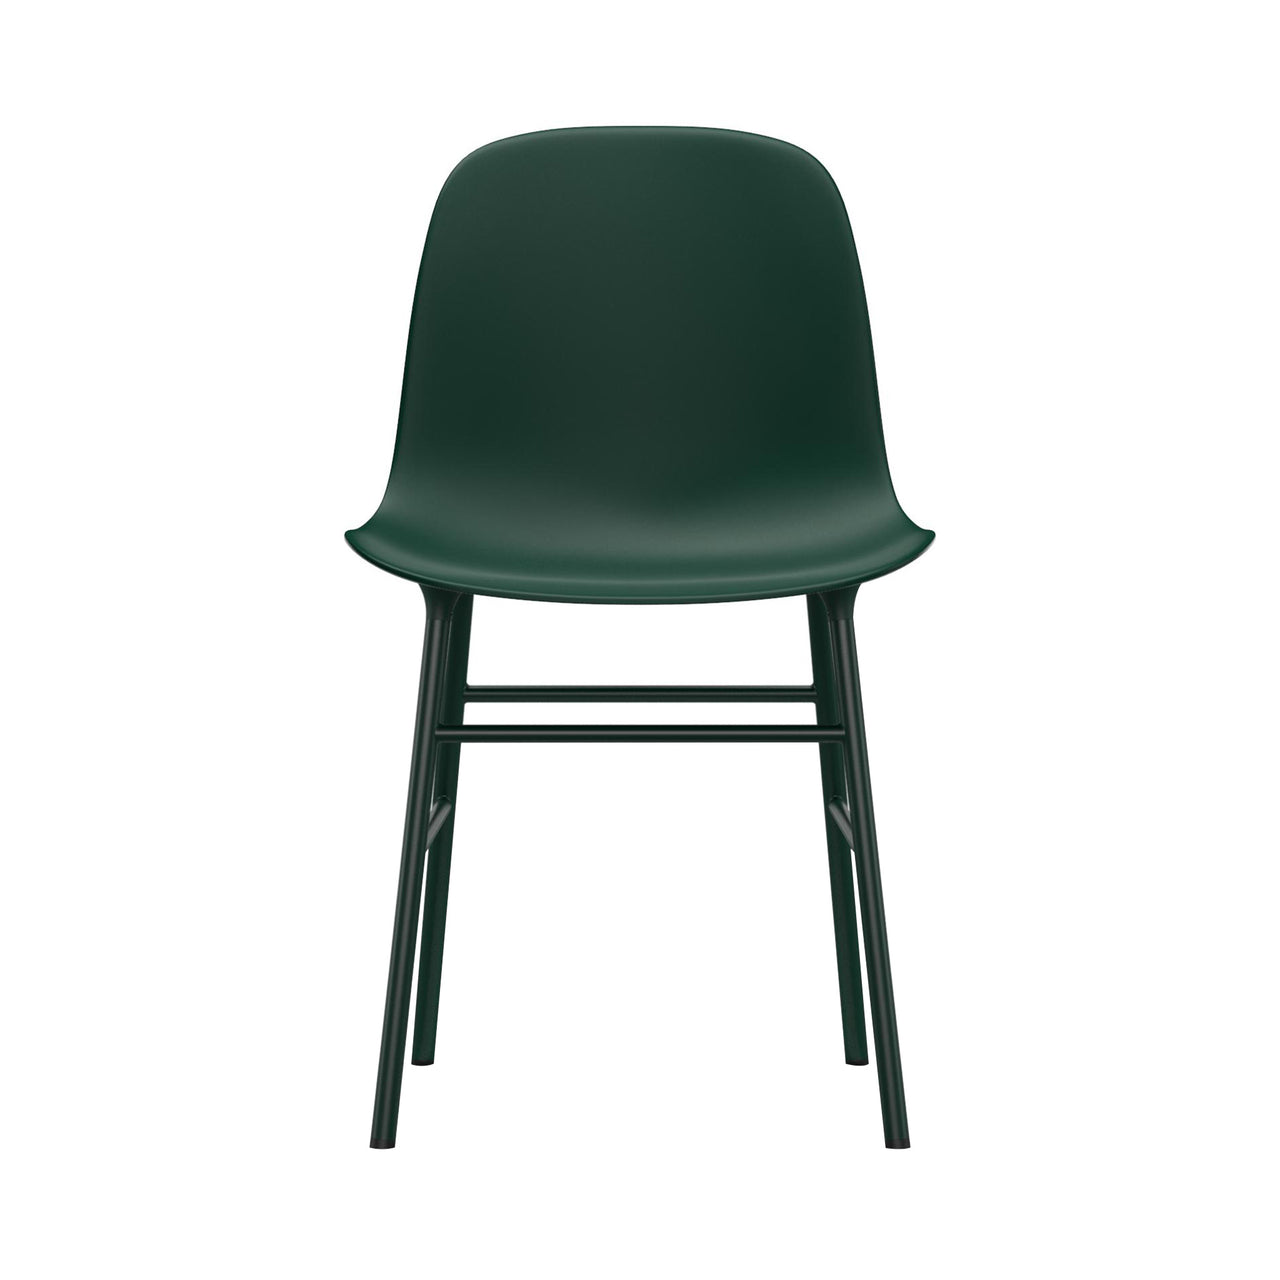 Form Chair: Steel + Green